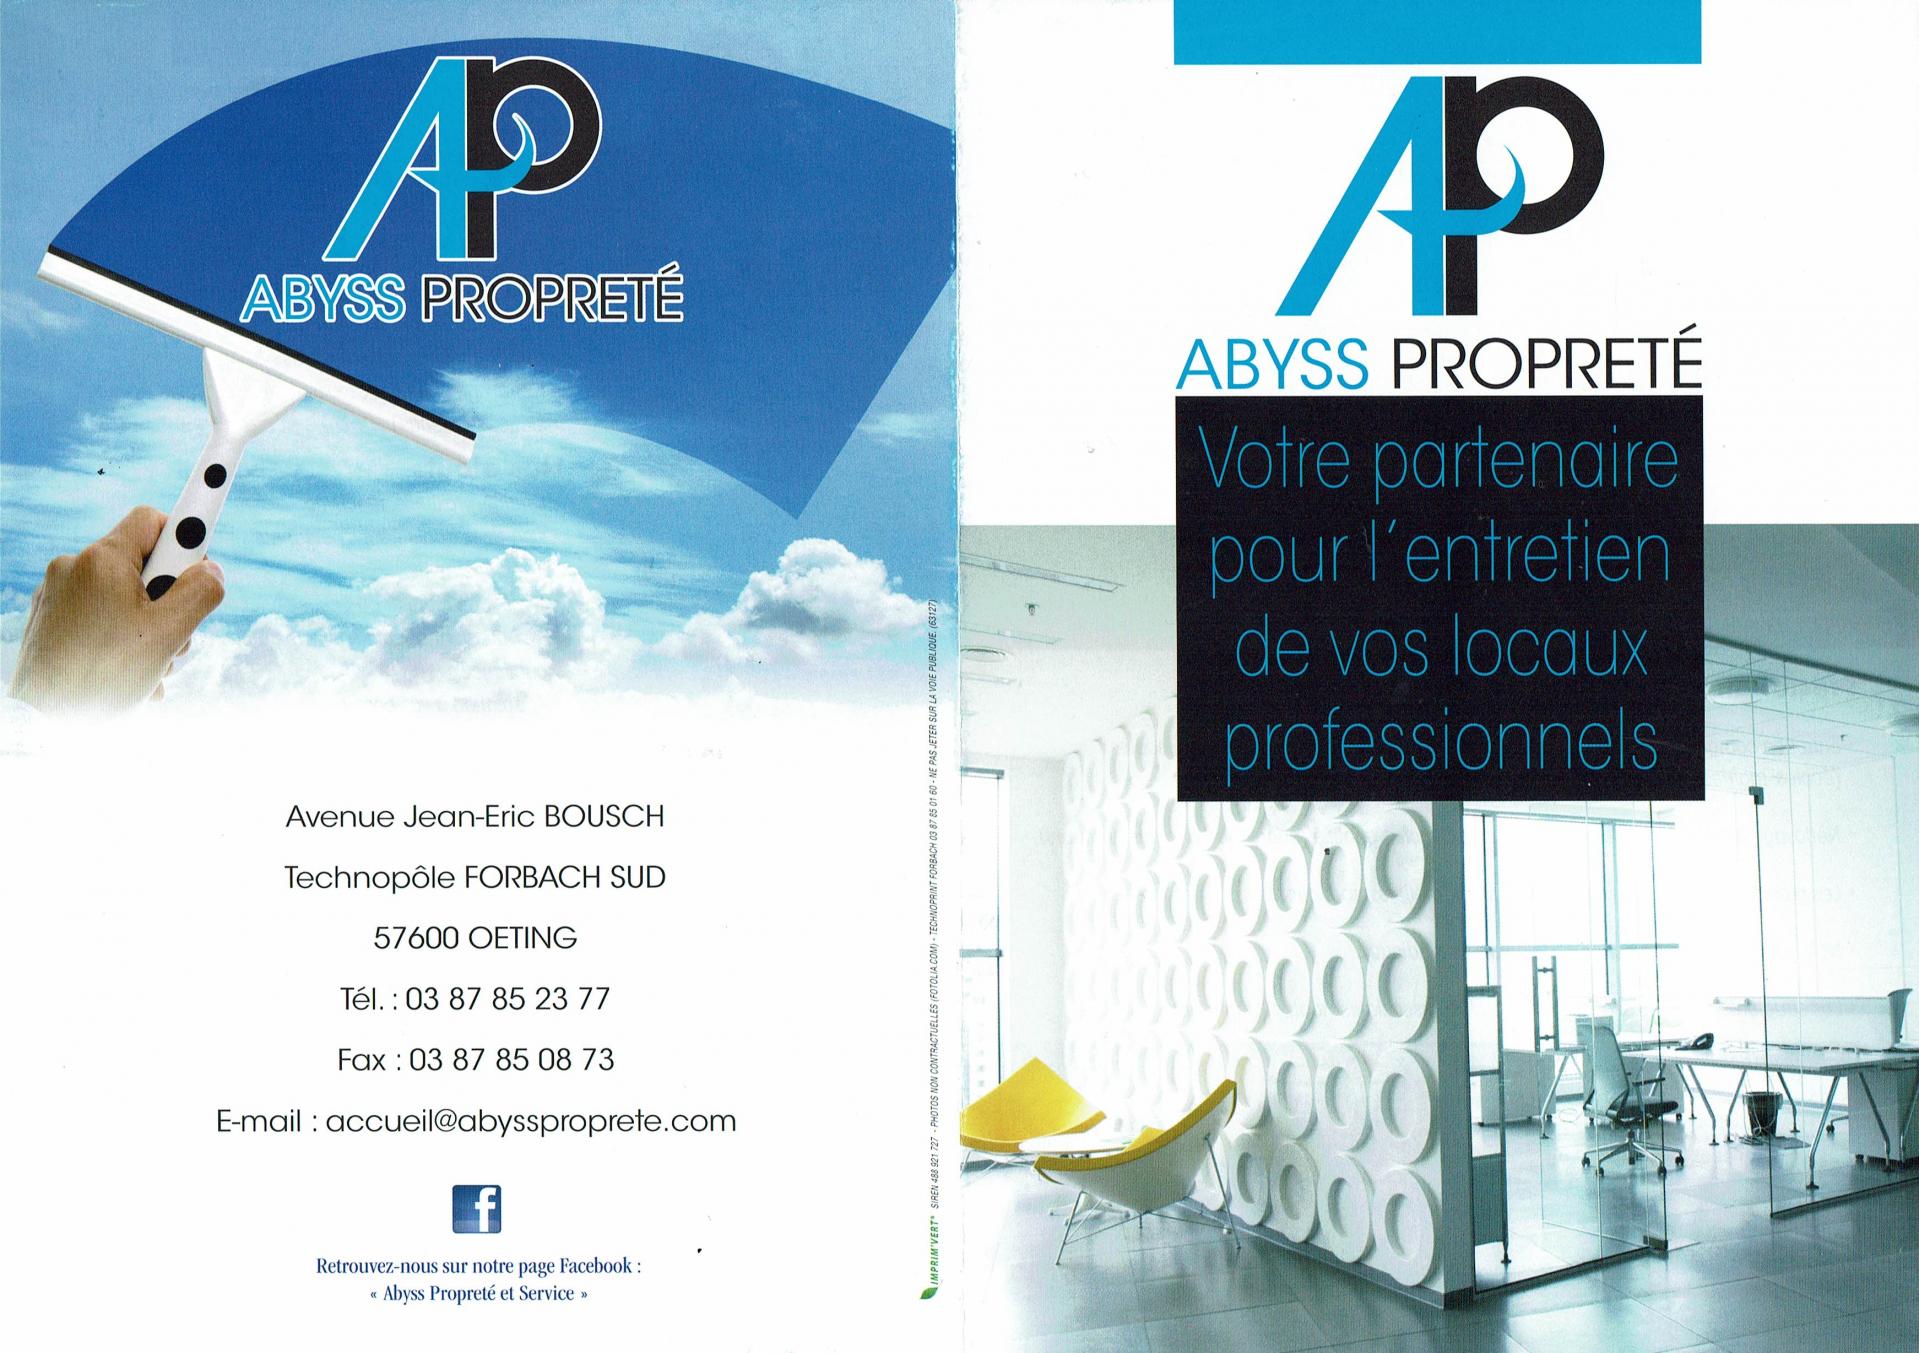 Abyss proprete flyer recto